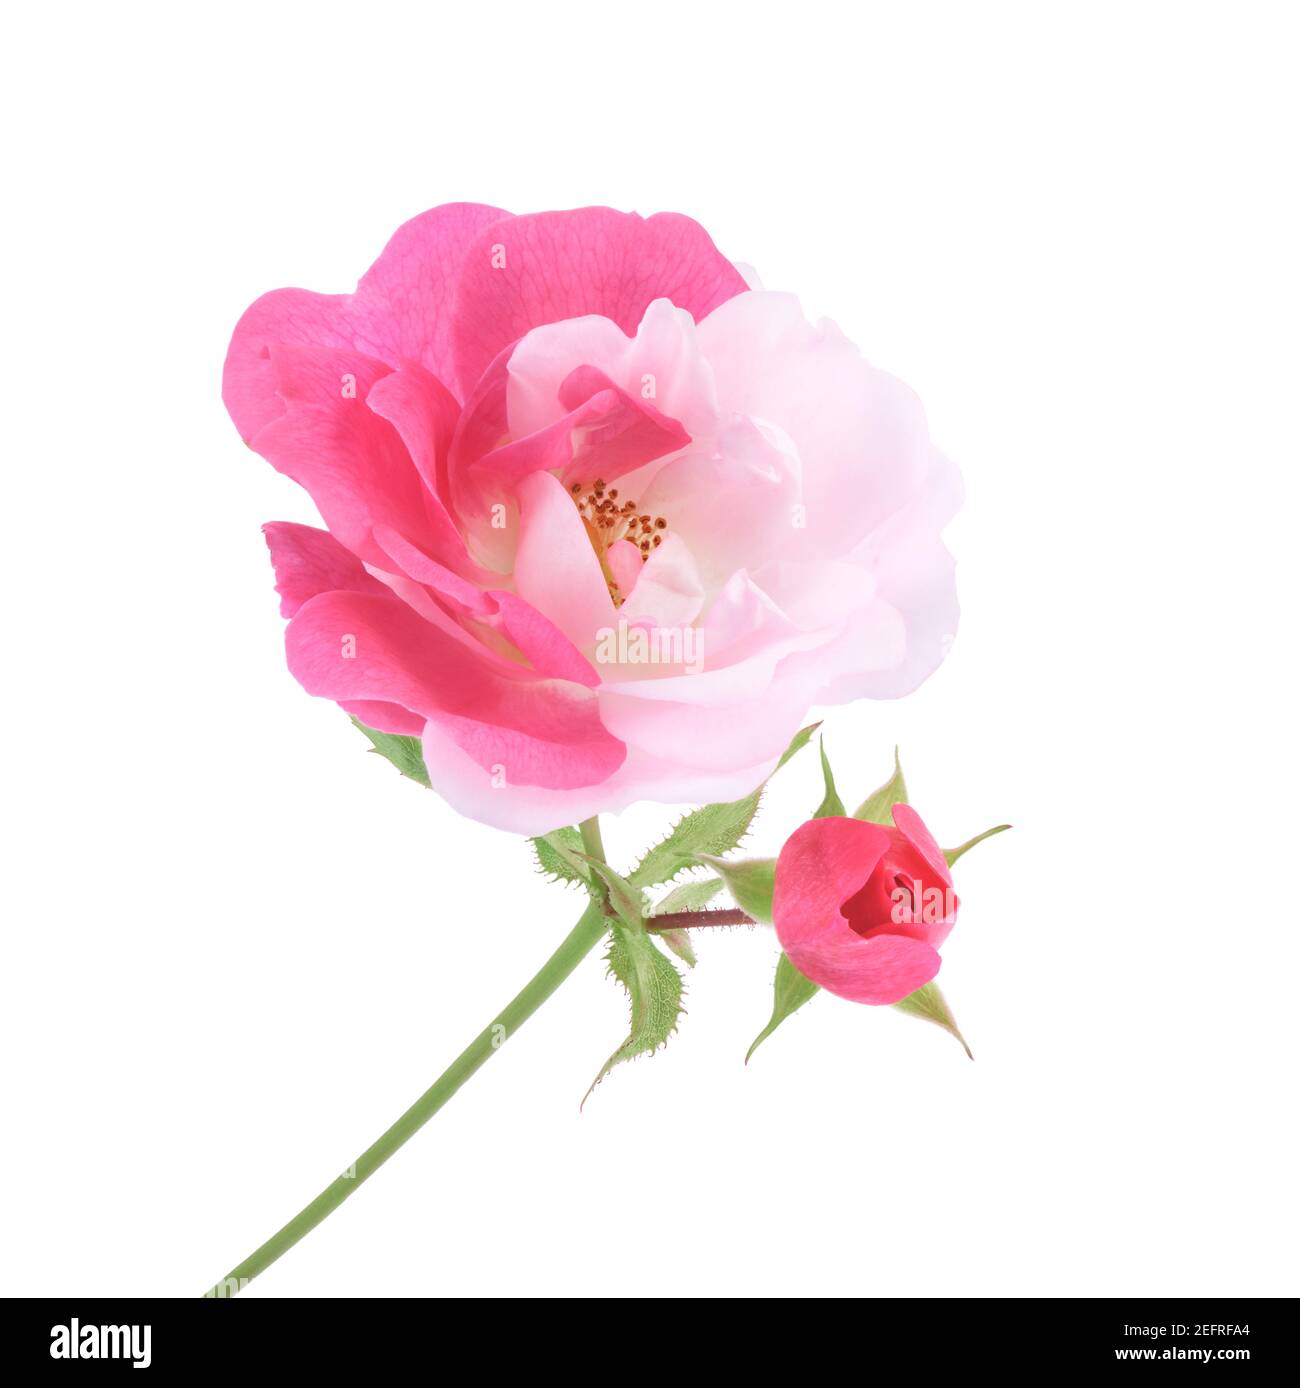 Half-pink half-white, bi-color Damask Rose flower and a pink little bud on a green stem. Artistic close-up of a sporting flower, isolated on white stu Stock Photo